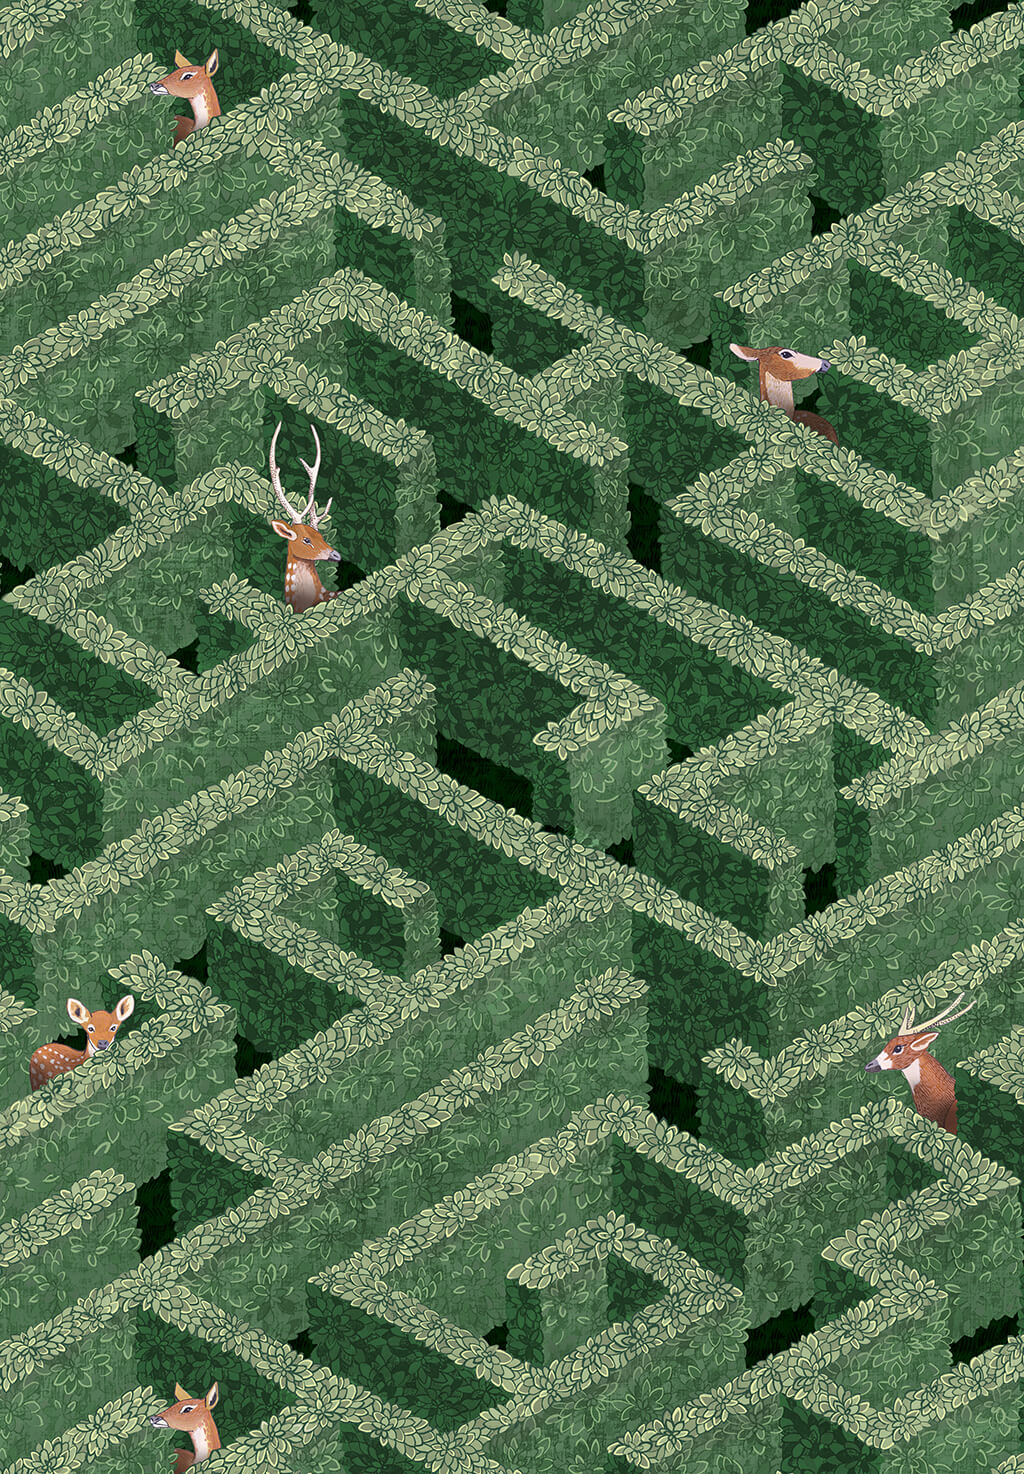 images/productimages/small/jmw-100901-labyrinth-with-deer-green.jpg